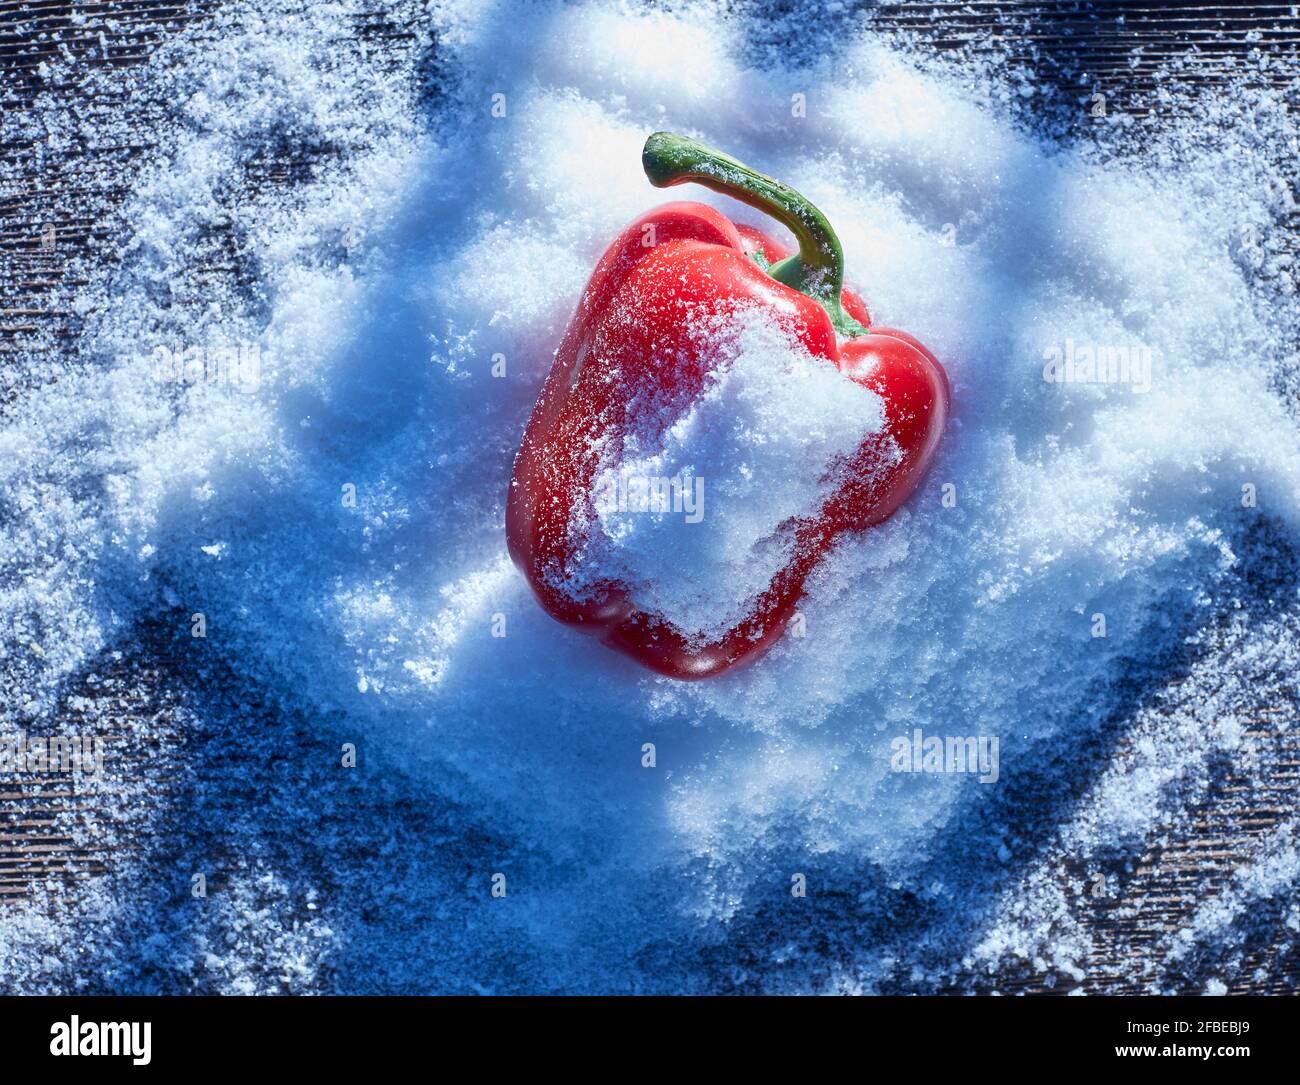 Red bell pepper lying in snow Stock Photo